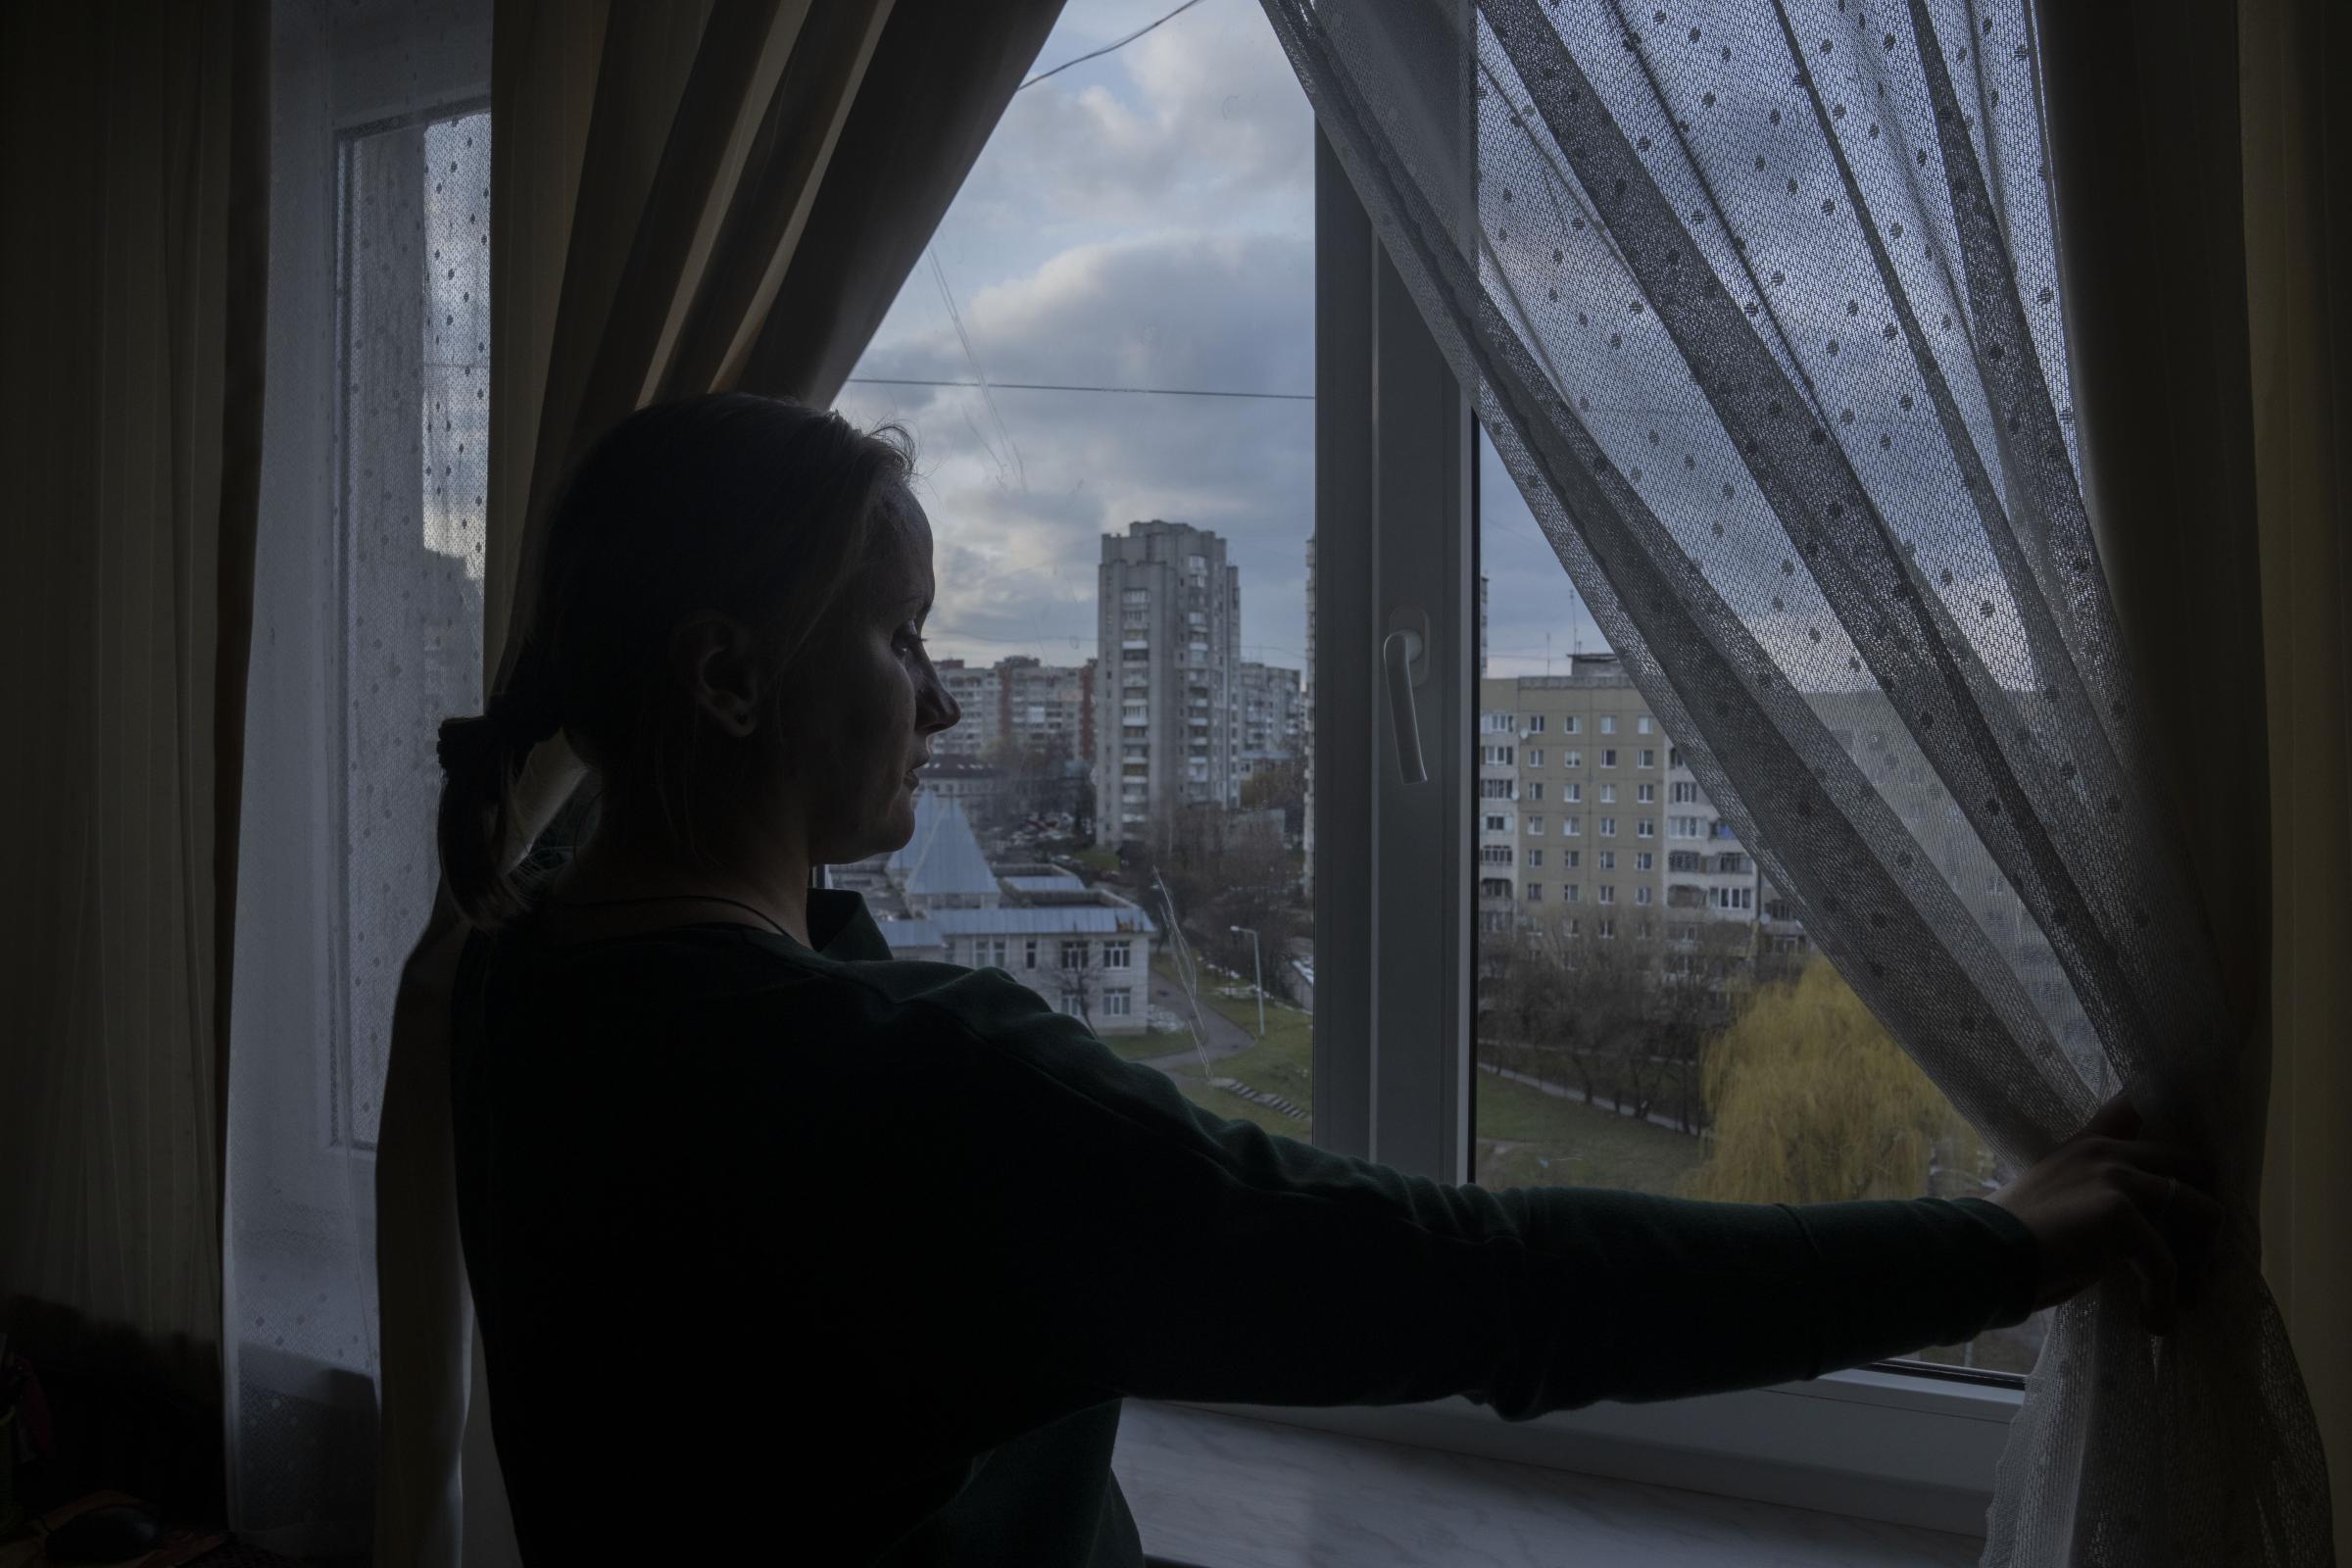 Olha Salivonchuk, head of the local association of apartment owners, looks out of the window in her living area, at her apartment.